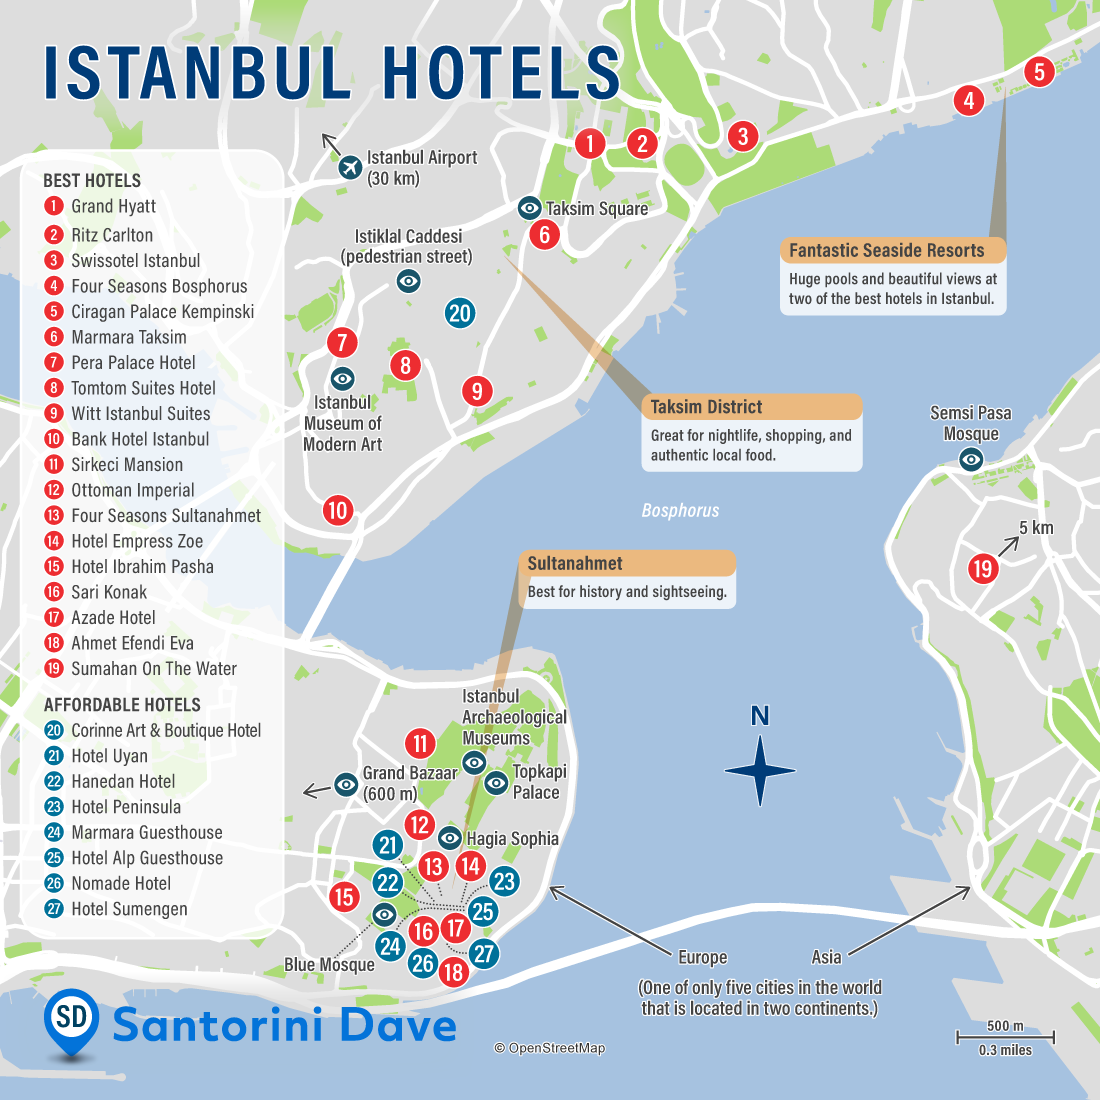 Map of Istanbul Neighborhoods and Best Hotels